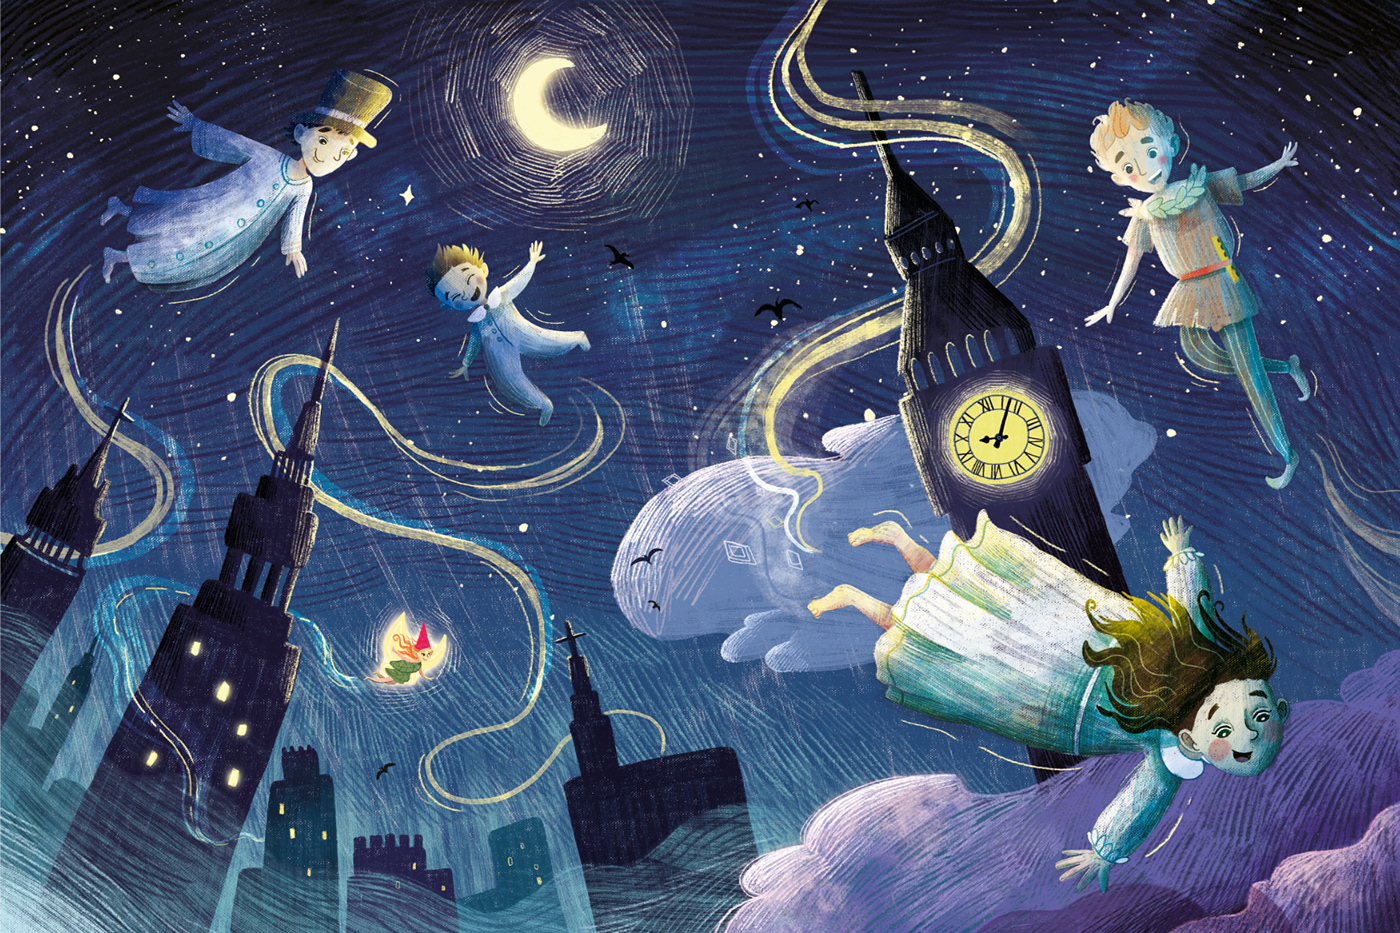 Illustration inspired by a J.M. Barrie's book "Peter Pan". Picture illustrates a "Flight" chapter.